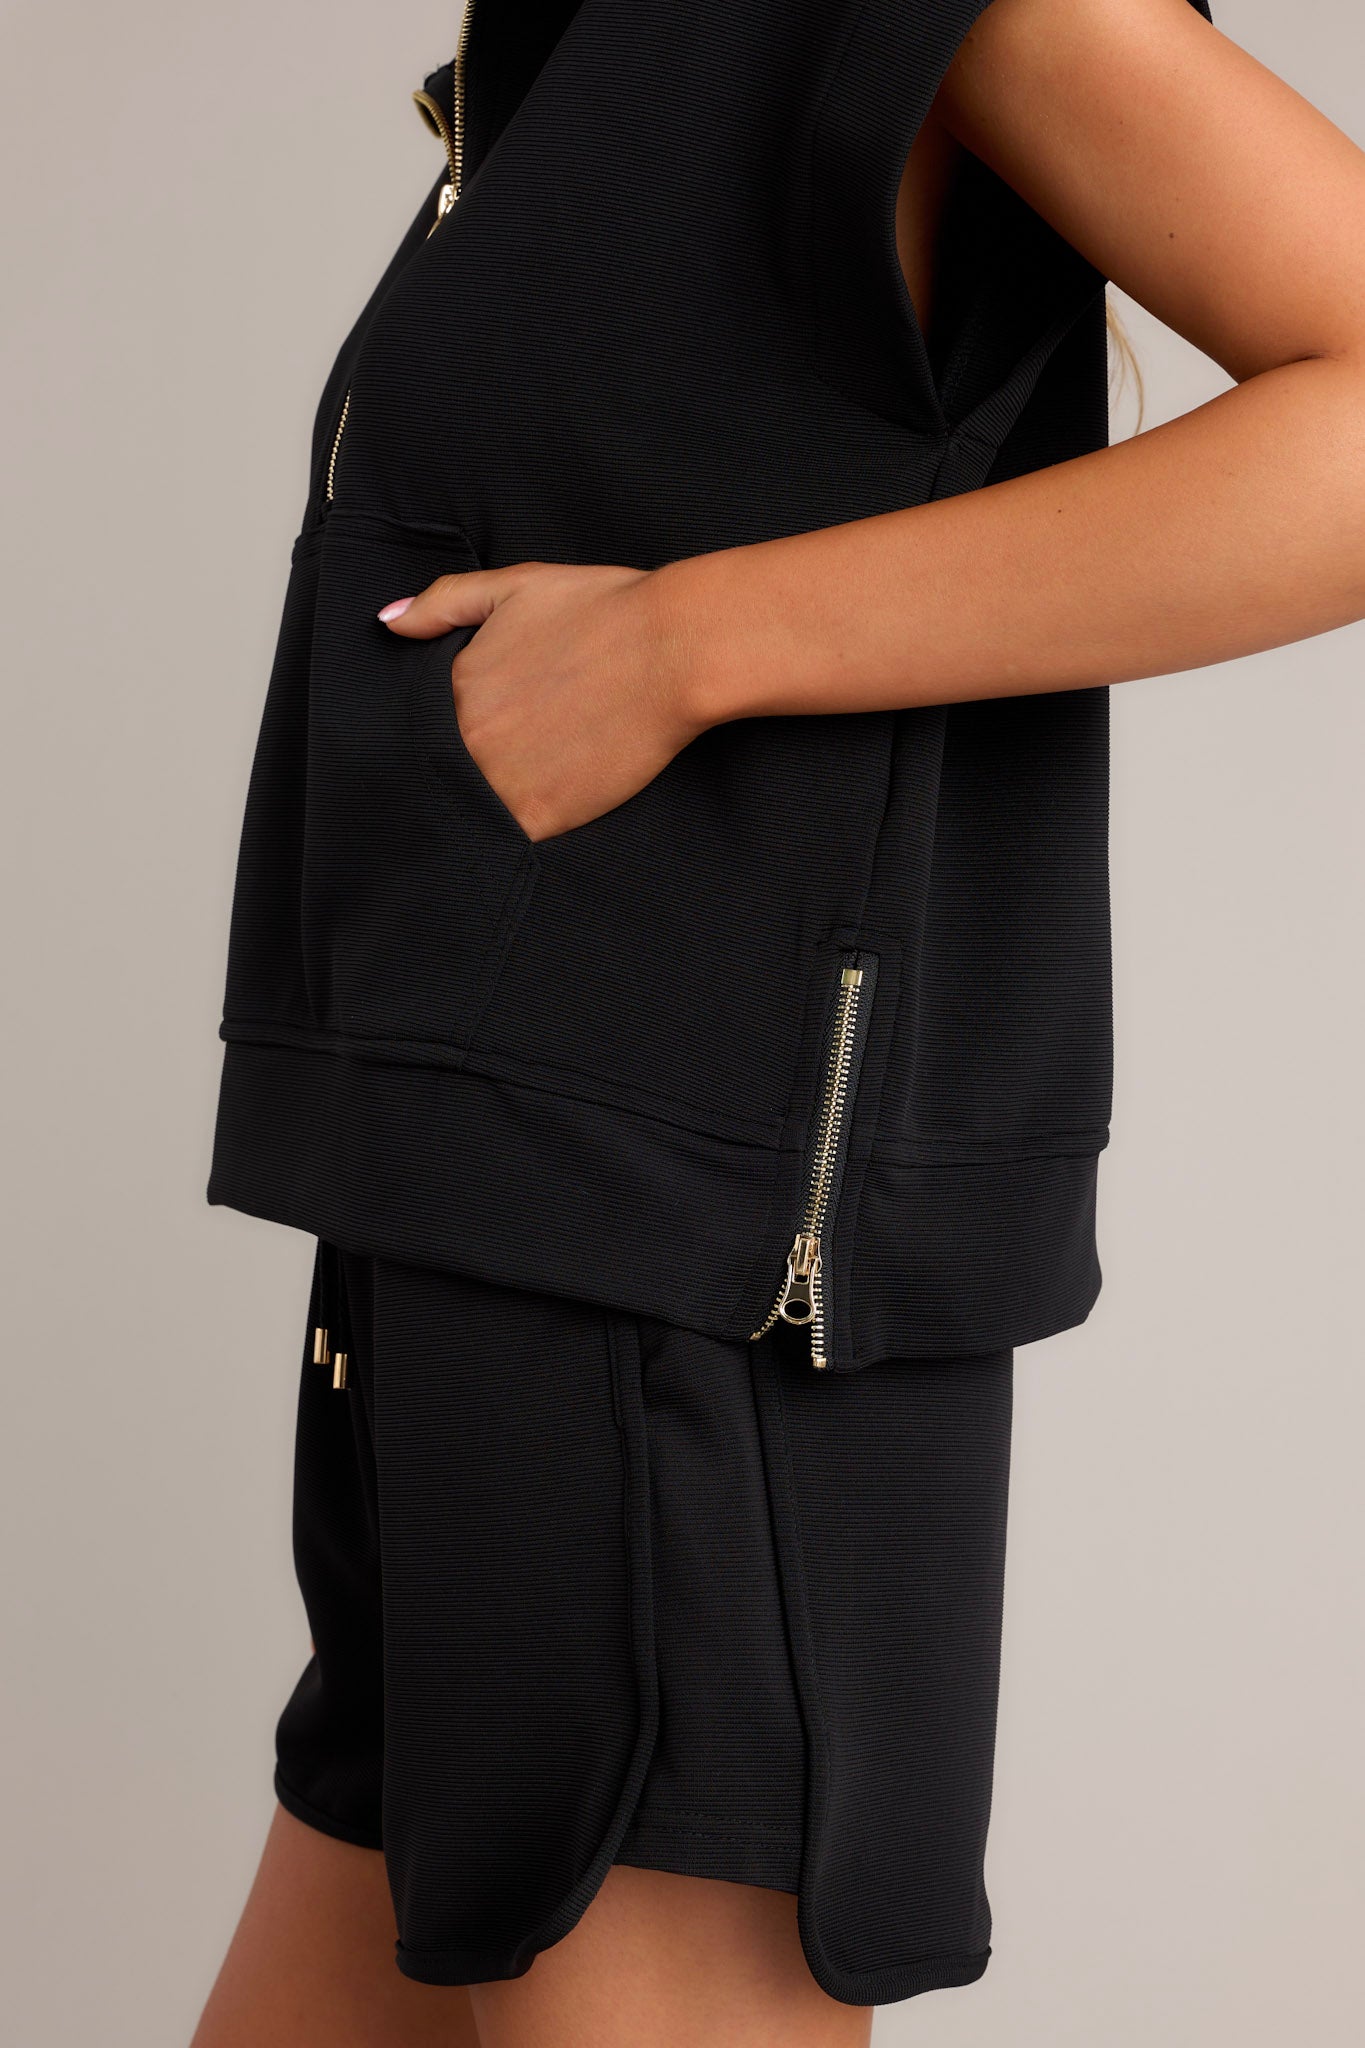 Side view of a black pullover showcasing the collared neckline, gold hardware, functional half zip design, kangaroo pocket, functional zippers on the sides, and short cap sleeves.